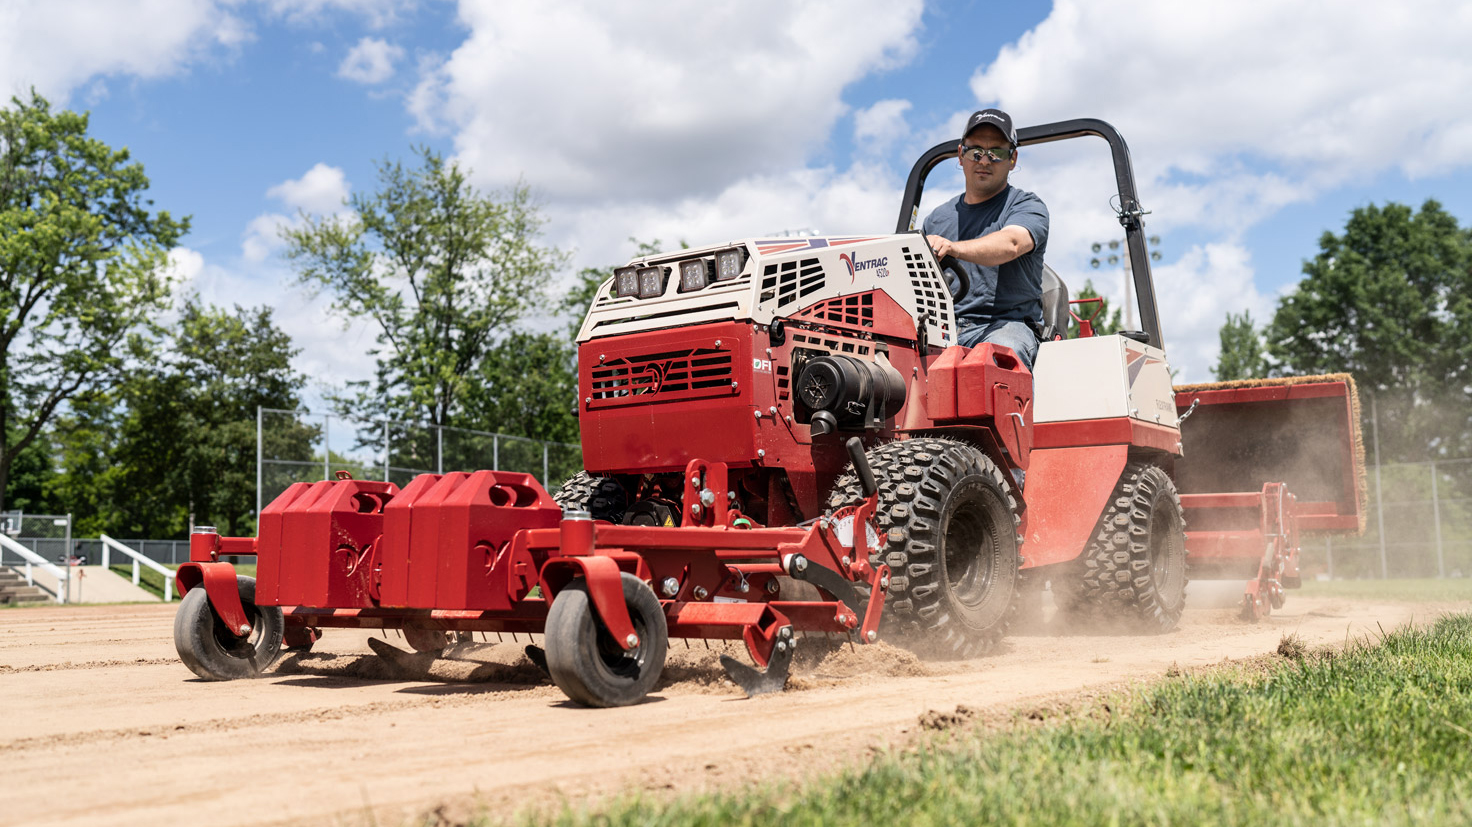 Maintain Ballfields With One Tractor